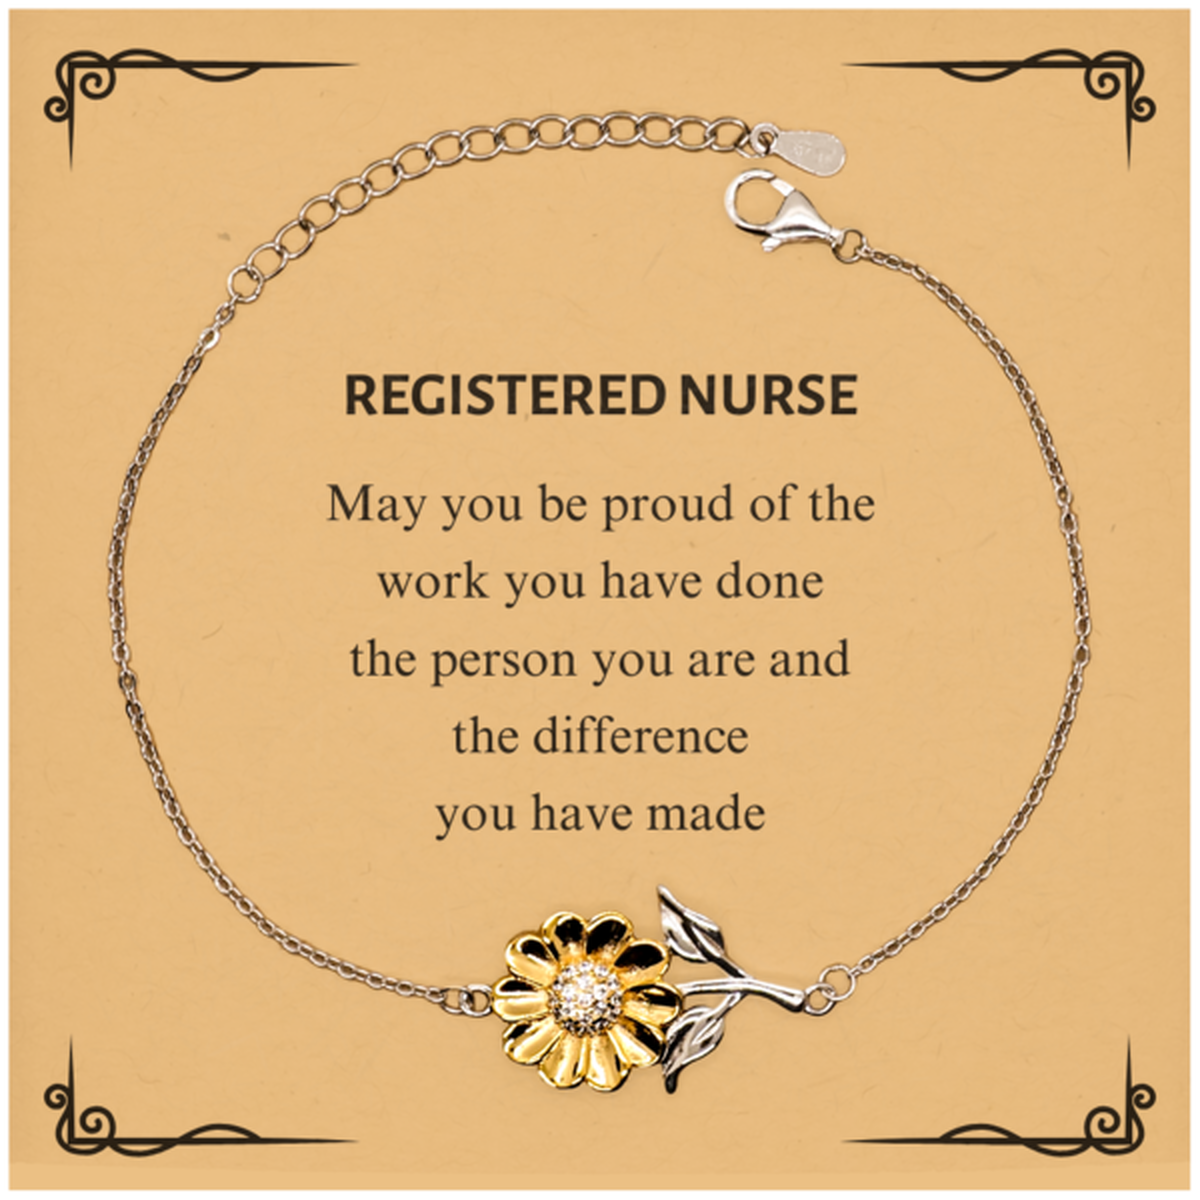 Registered Nurse May you be proud of the work you have done, Retirement Registered Nurse Sunflower Bracelet for Colleague Appreciation Gifts Amazing for Registered Nurse